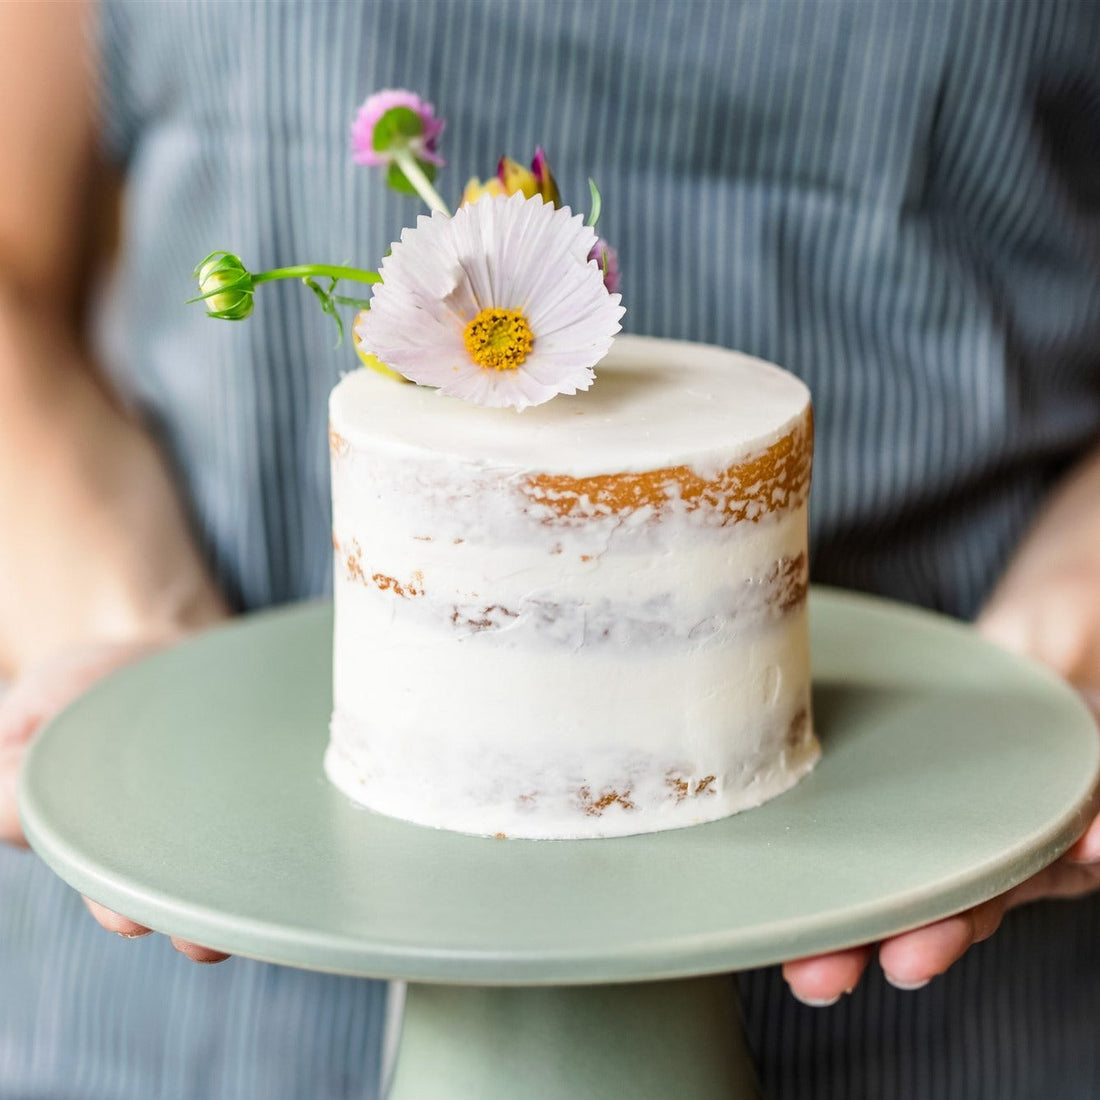 A round cake covered in a sheer layer of white buttercream and decorated with plume of fresh florals on top.